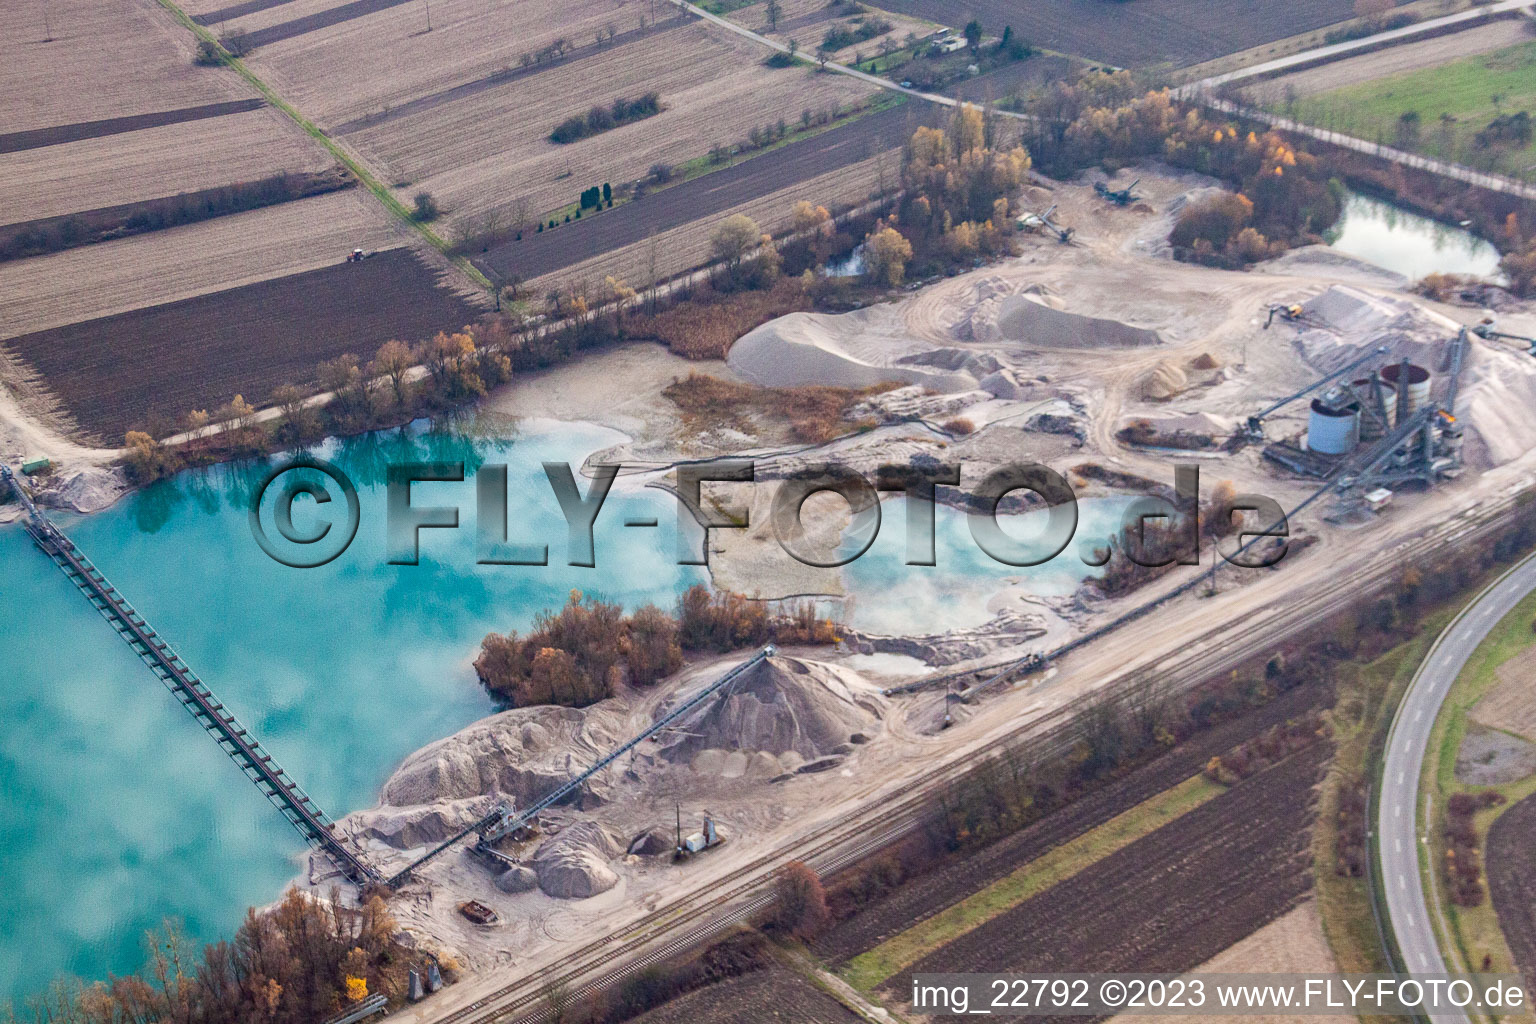 Quarry pond in Hagenbach in the state Rhineland-Palatinate, Germany seen from above